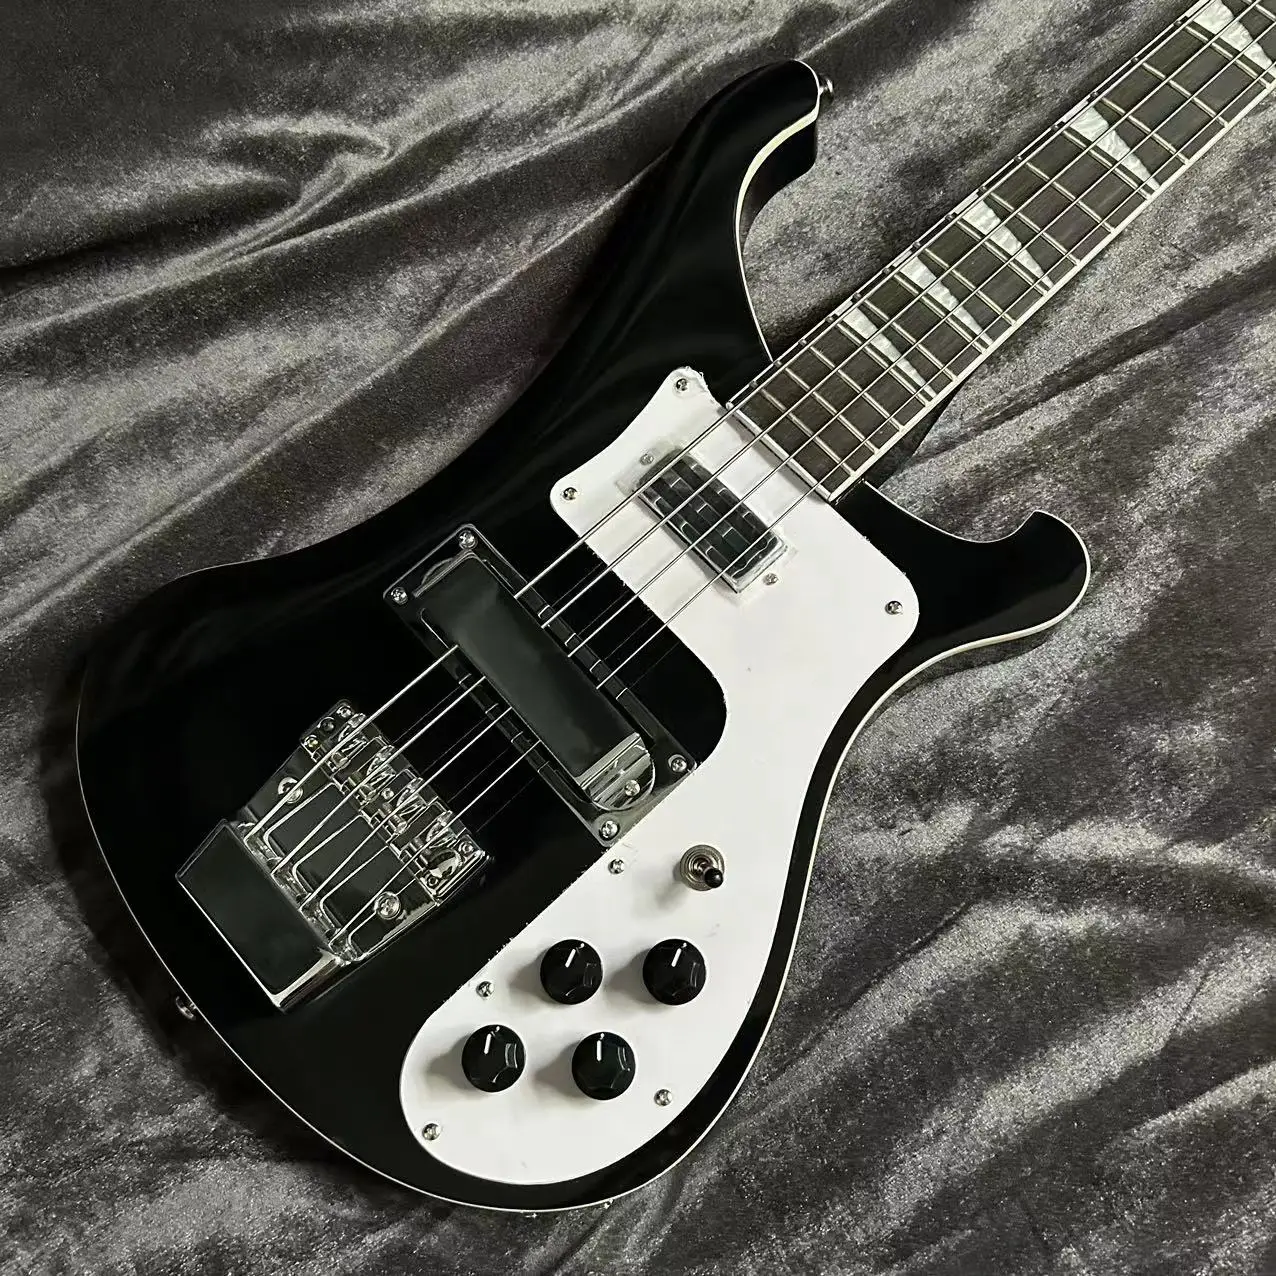 Assessing the Intonation and Tuning Stability of Rickenbacker Basses插图